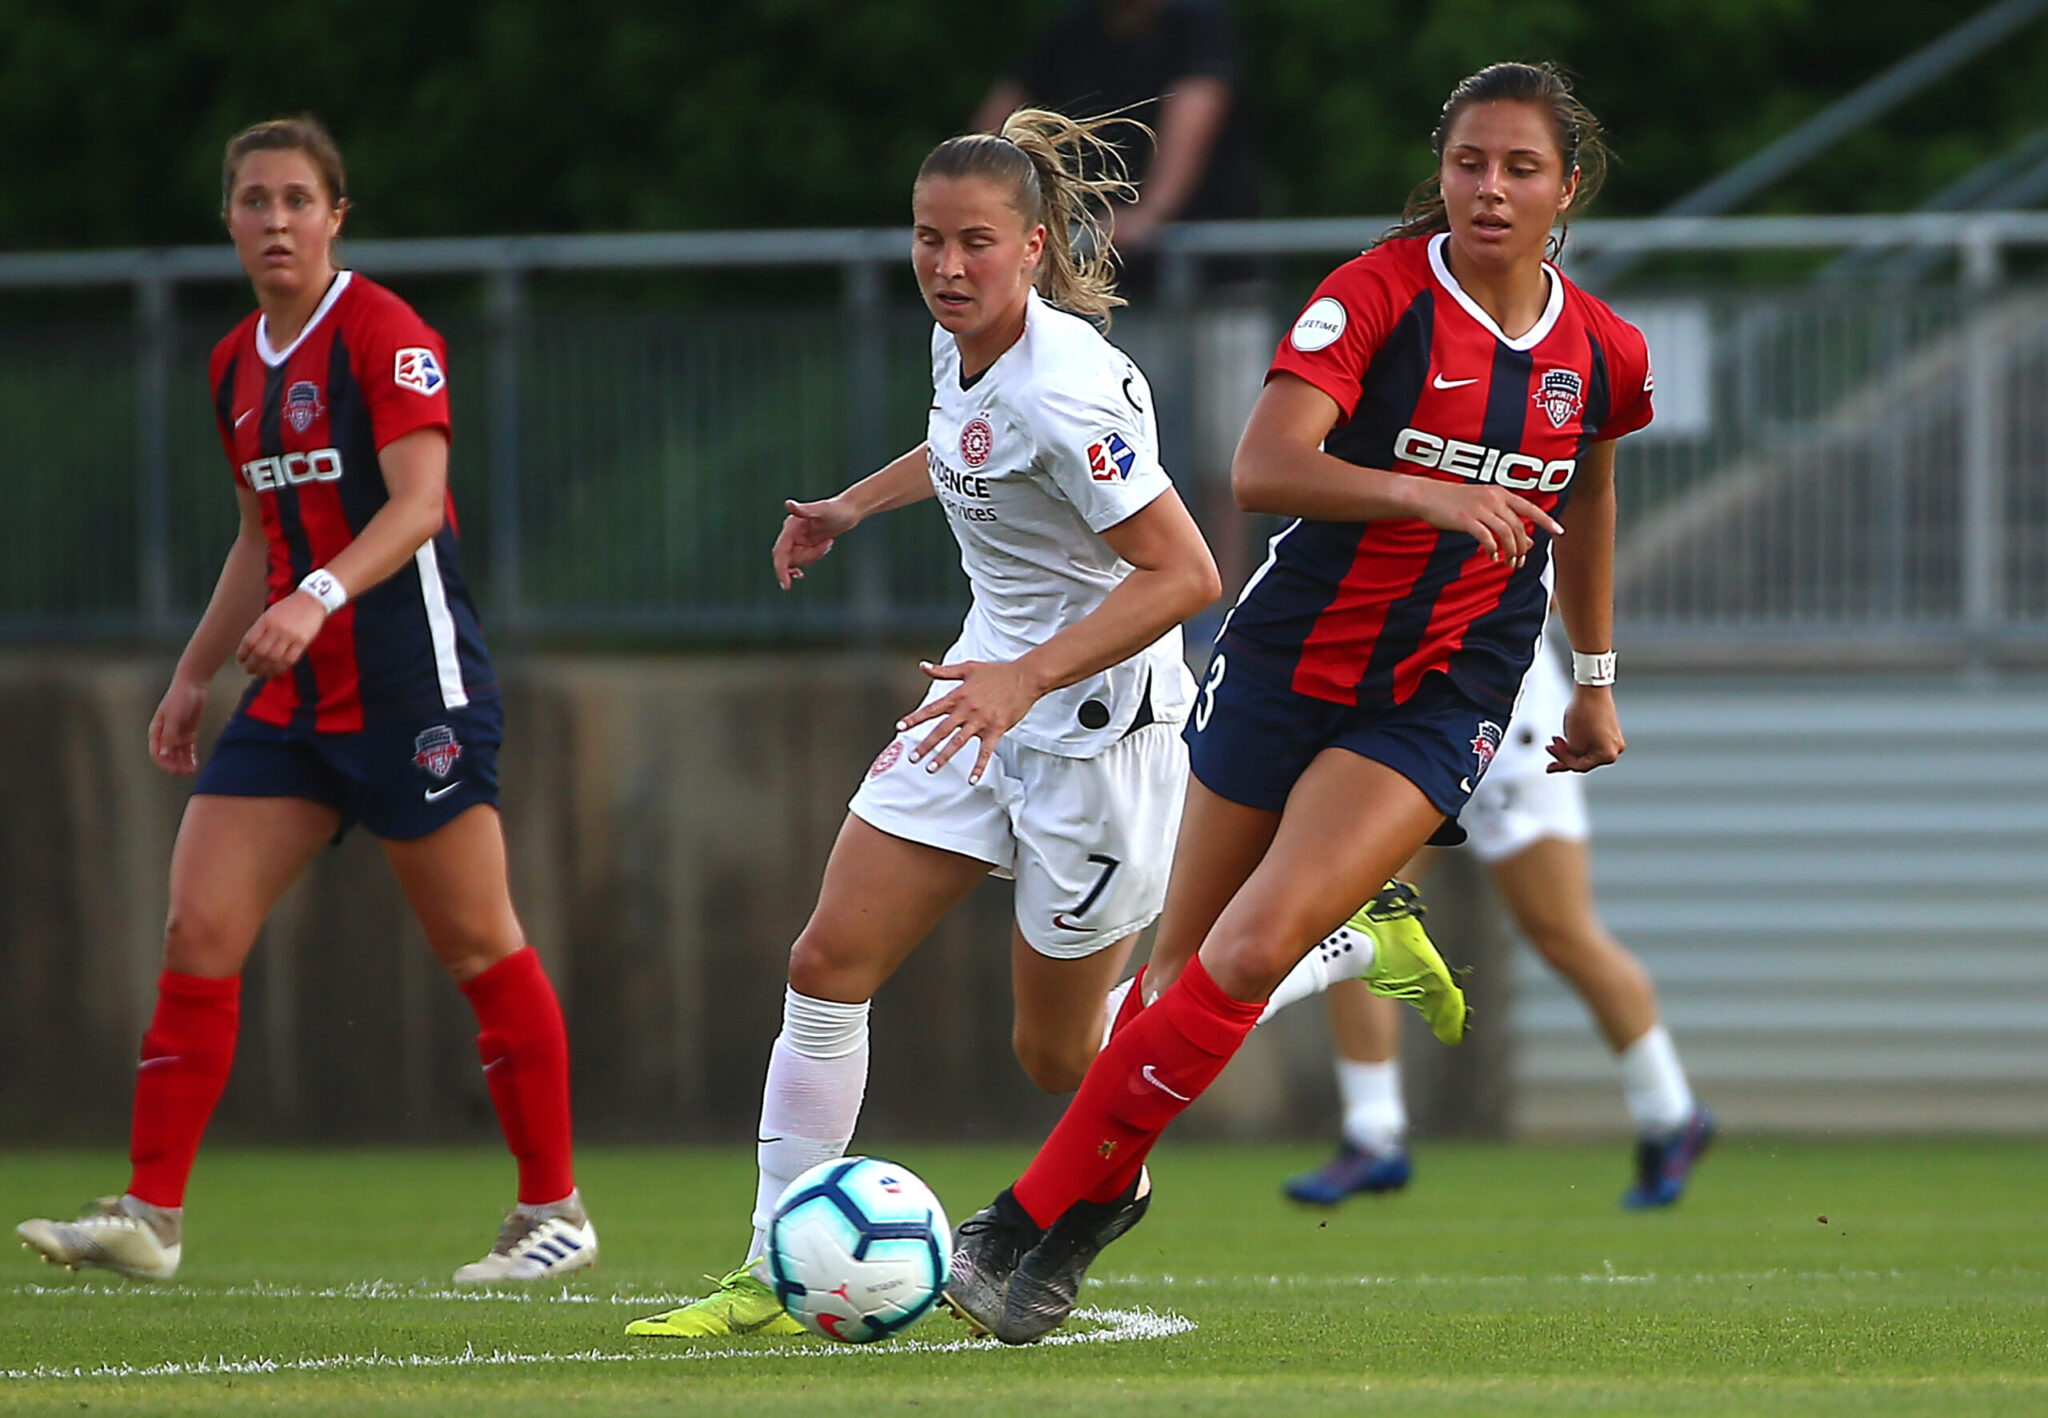 Spirit visit Portland to face Thorns in season finale Featured Image